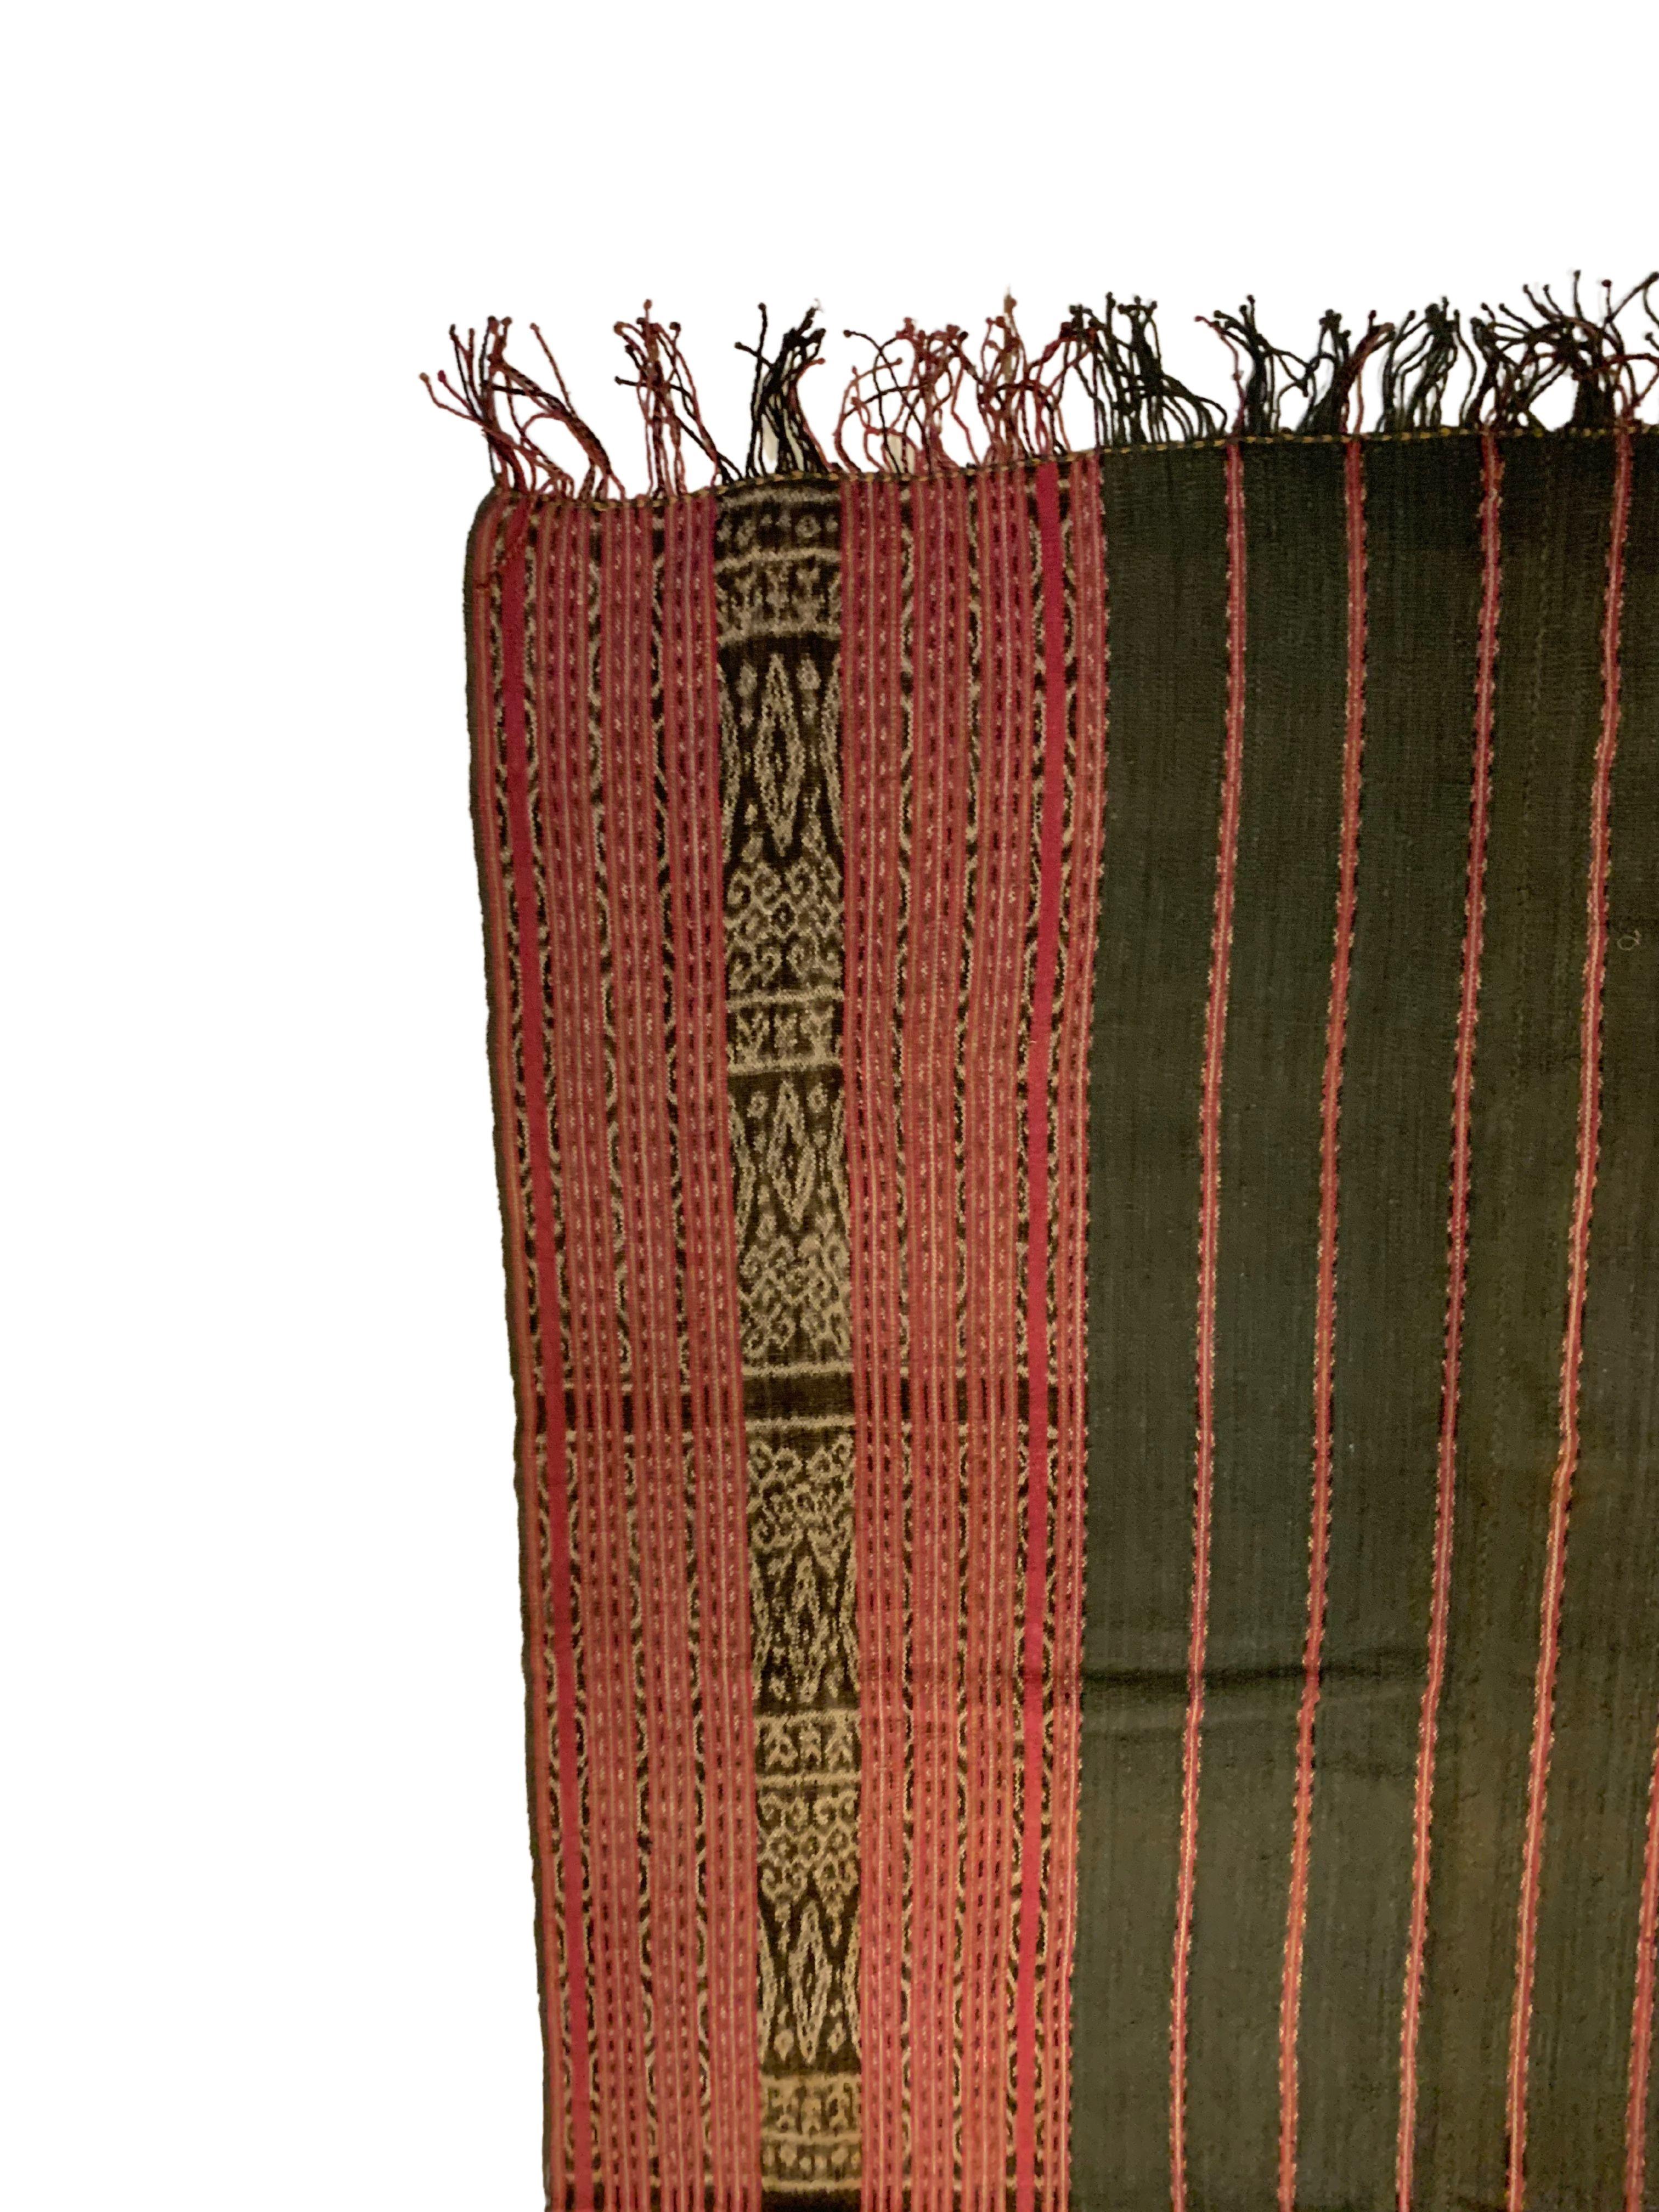 Other Ikat Textile from Timor Stunning Tribal Motifs & Colors, Indonesia, c. 1950